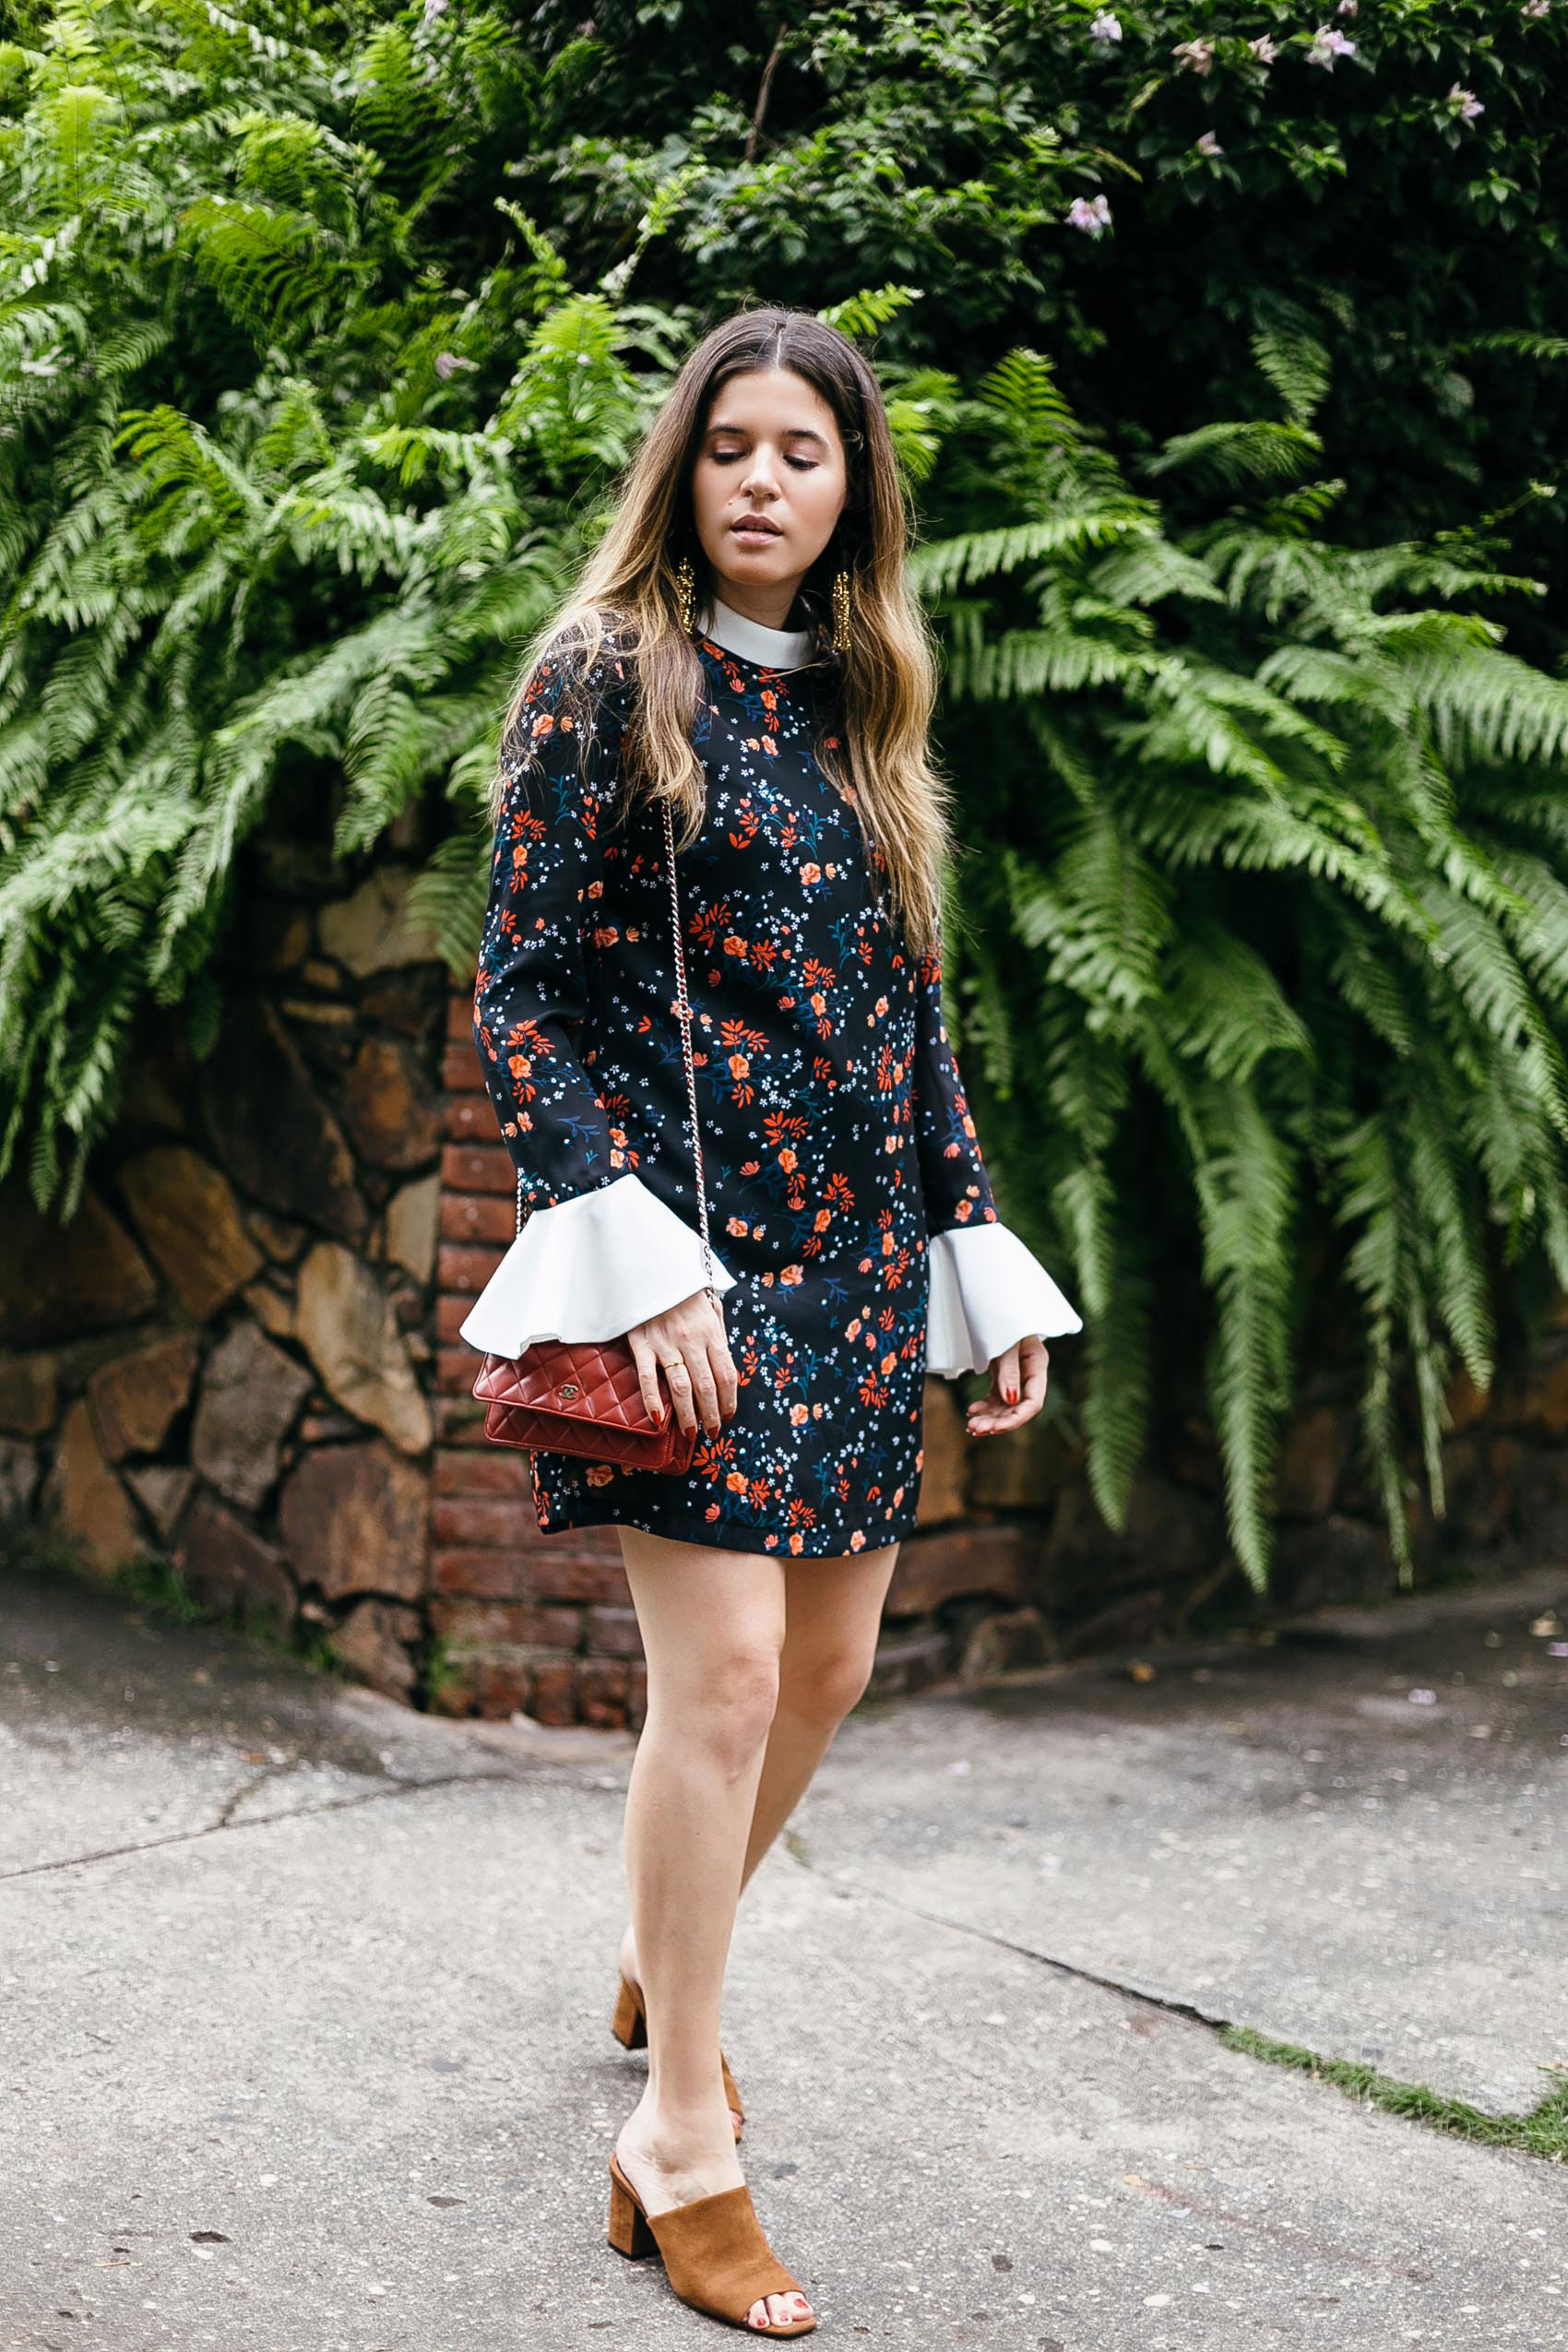 Maristella wearing a tunic floral dress from Endless Rose with contrast white flared sleeves, Chanel red mini bag, brown suede mules